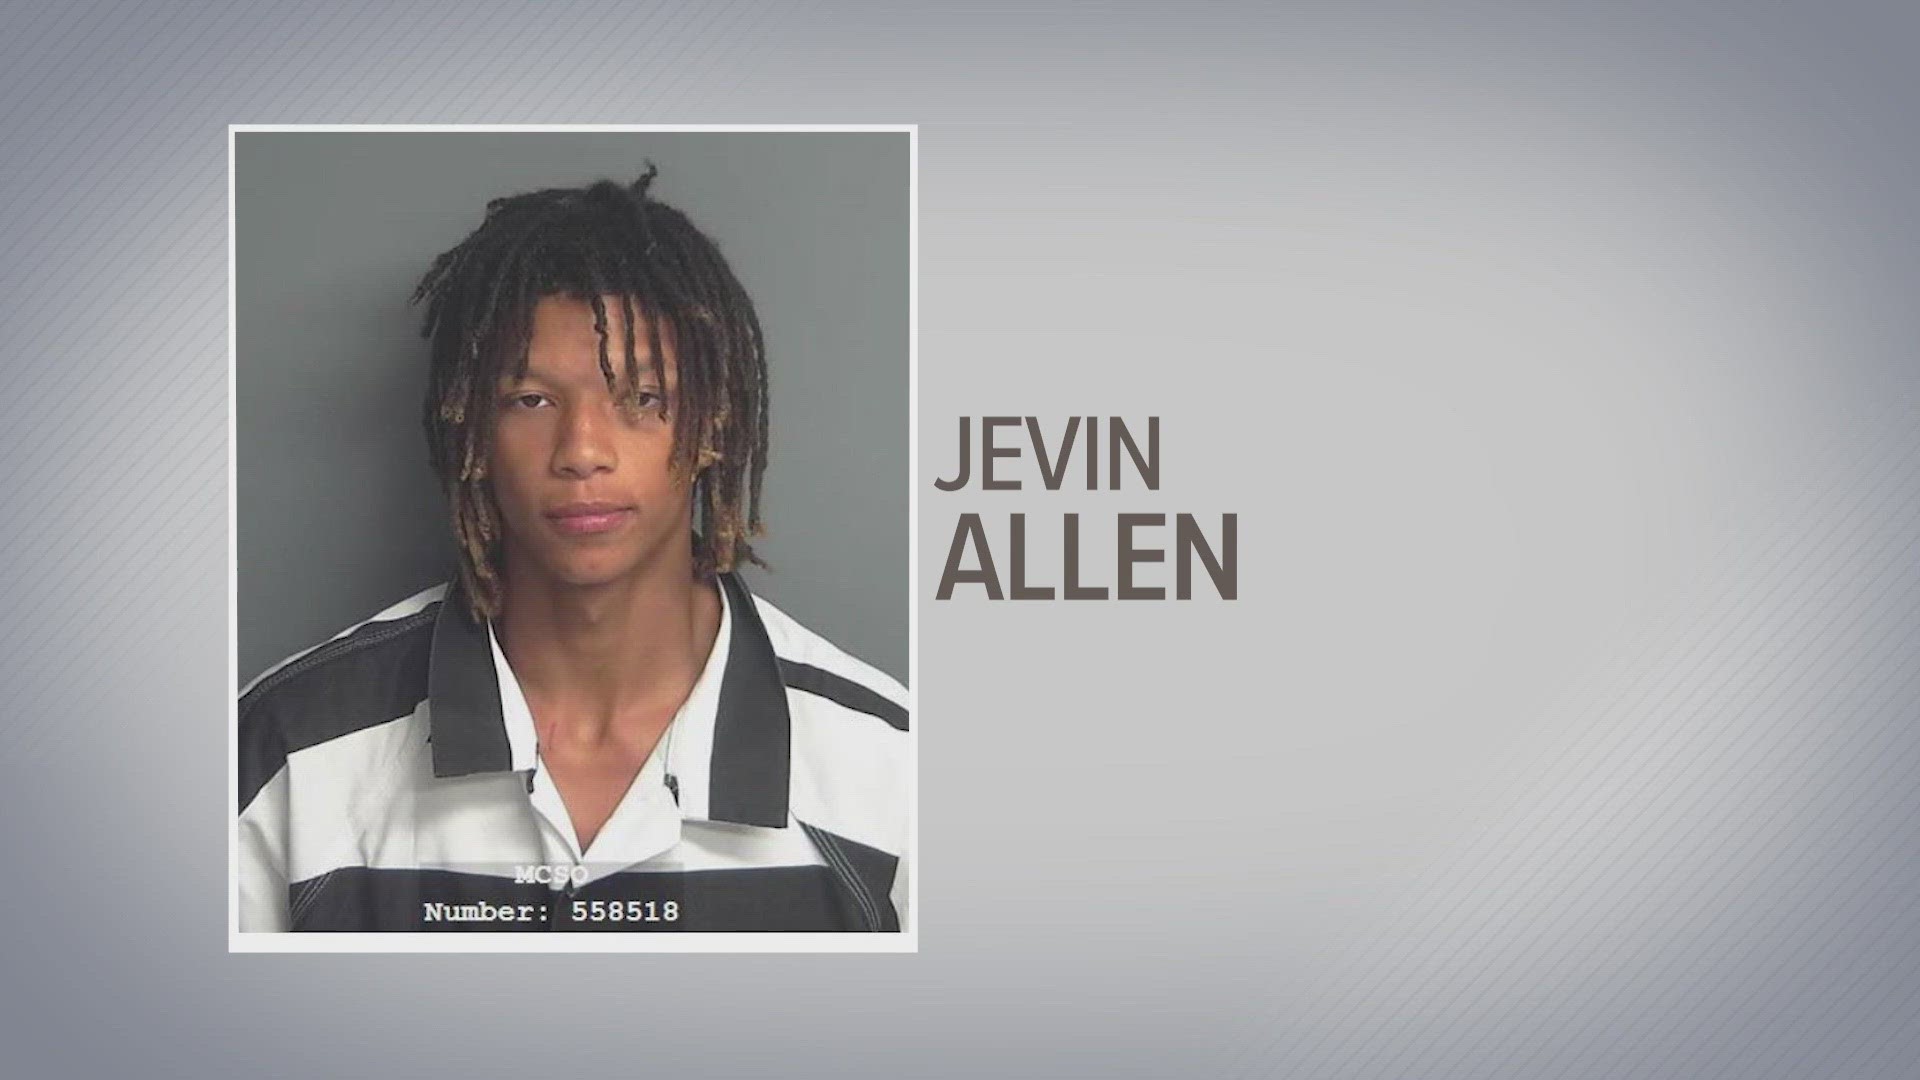 Jevin Allen is charged with assault on a public servant. His older brother, Jarrick Allen was also arrested and charged with the same crime for joining the attack.